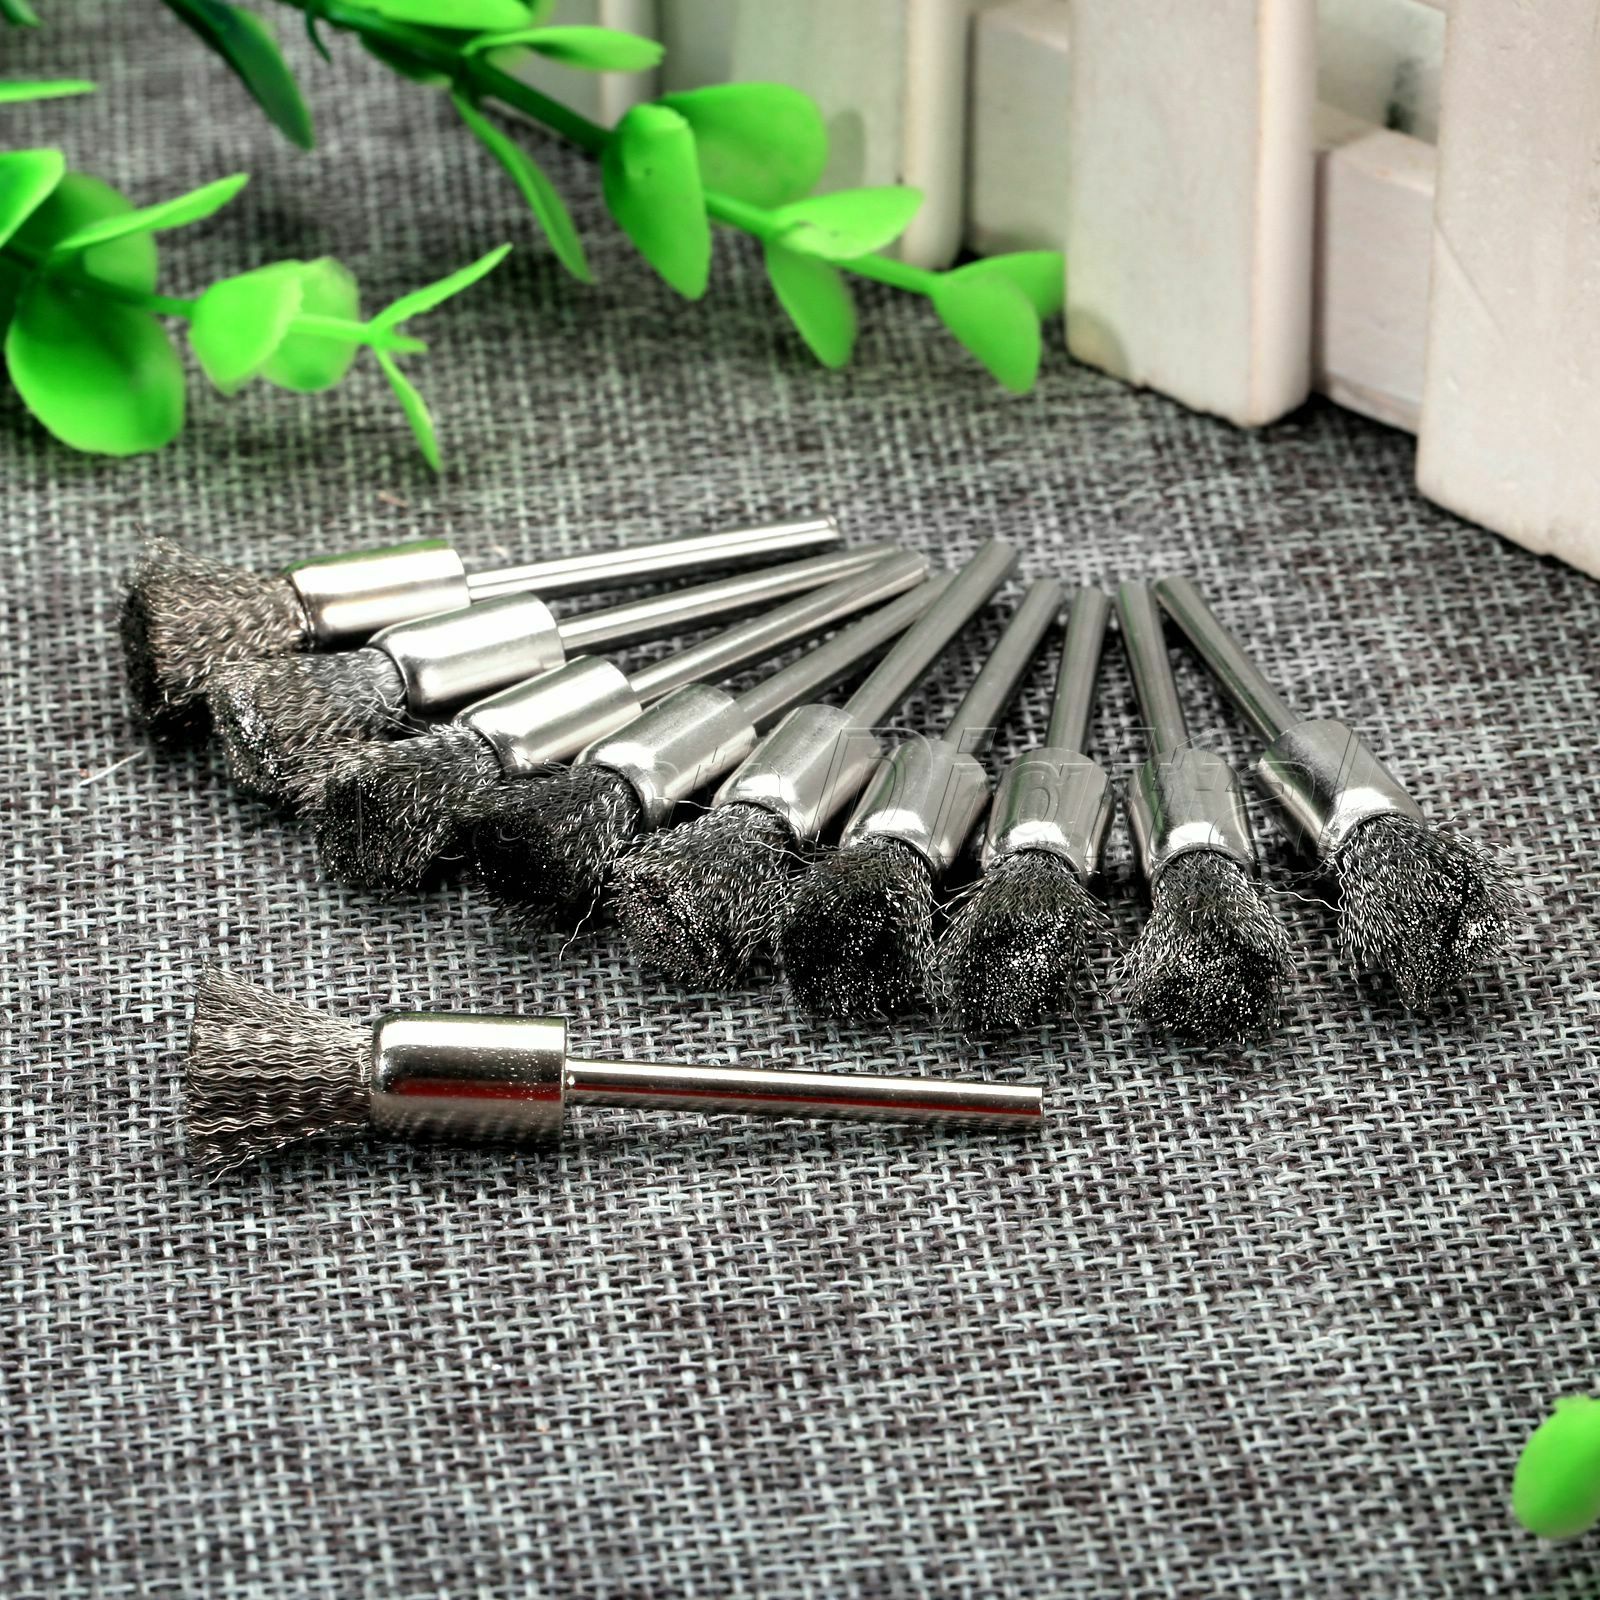 10pc 8mm Steel Wire Drill Polishing Cleaning Brushes 3mm Shank Rotary Power Tool